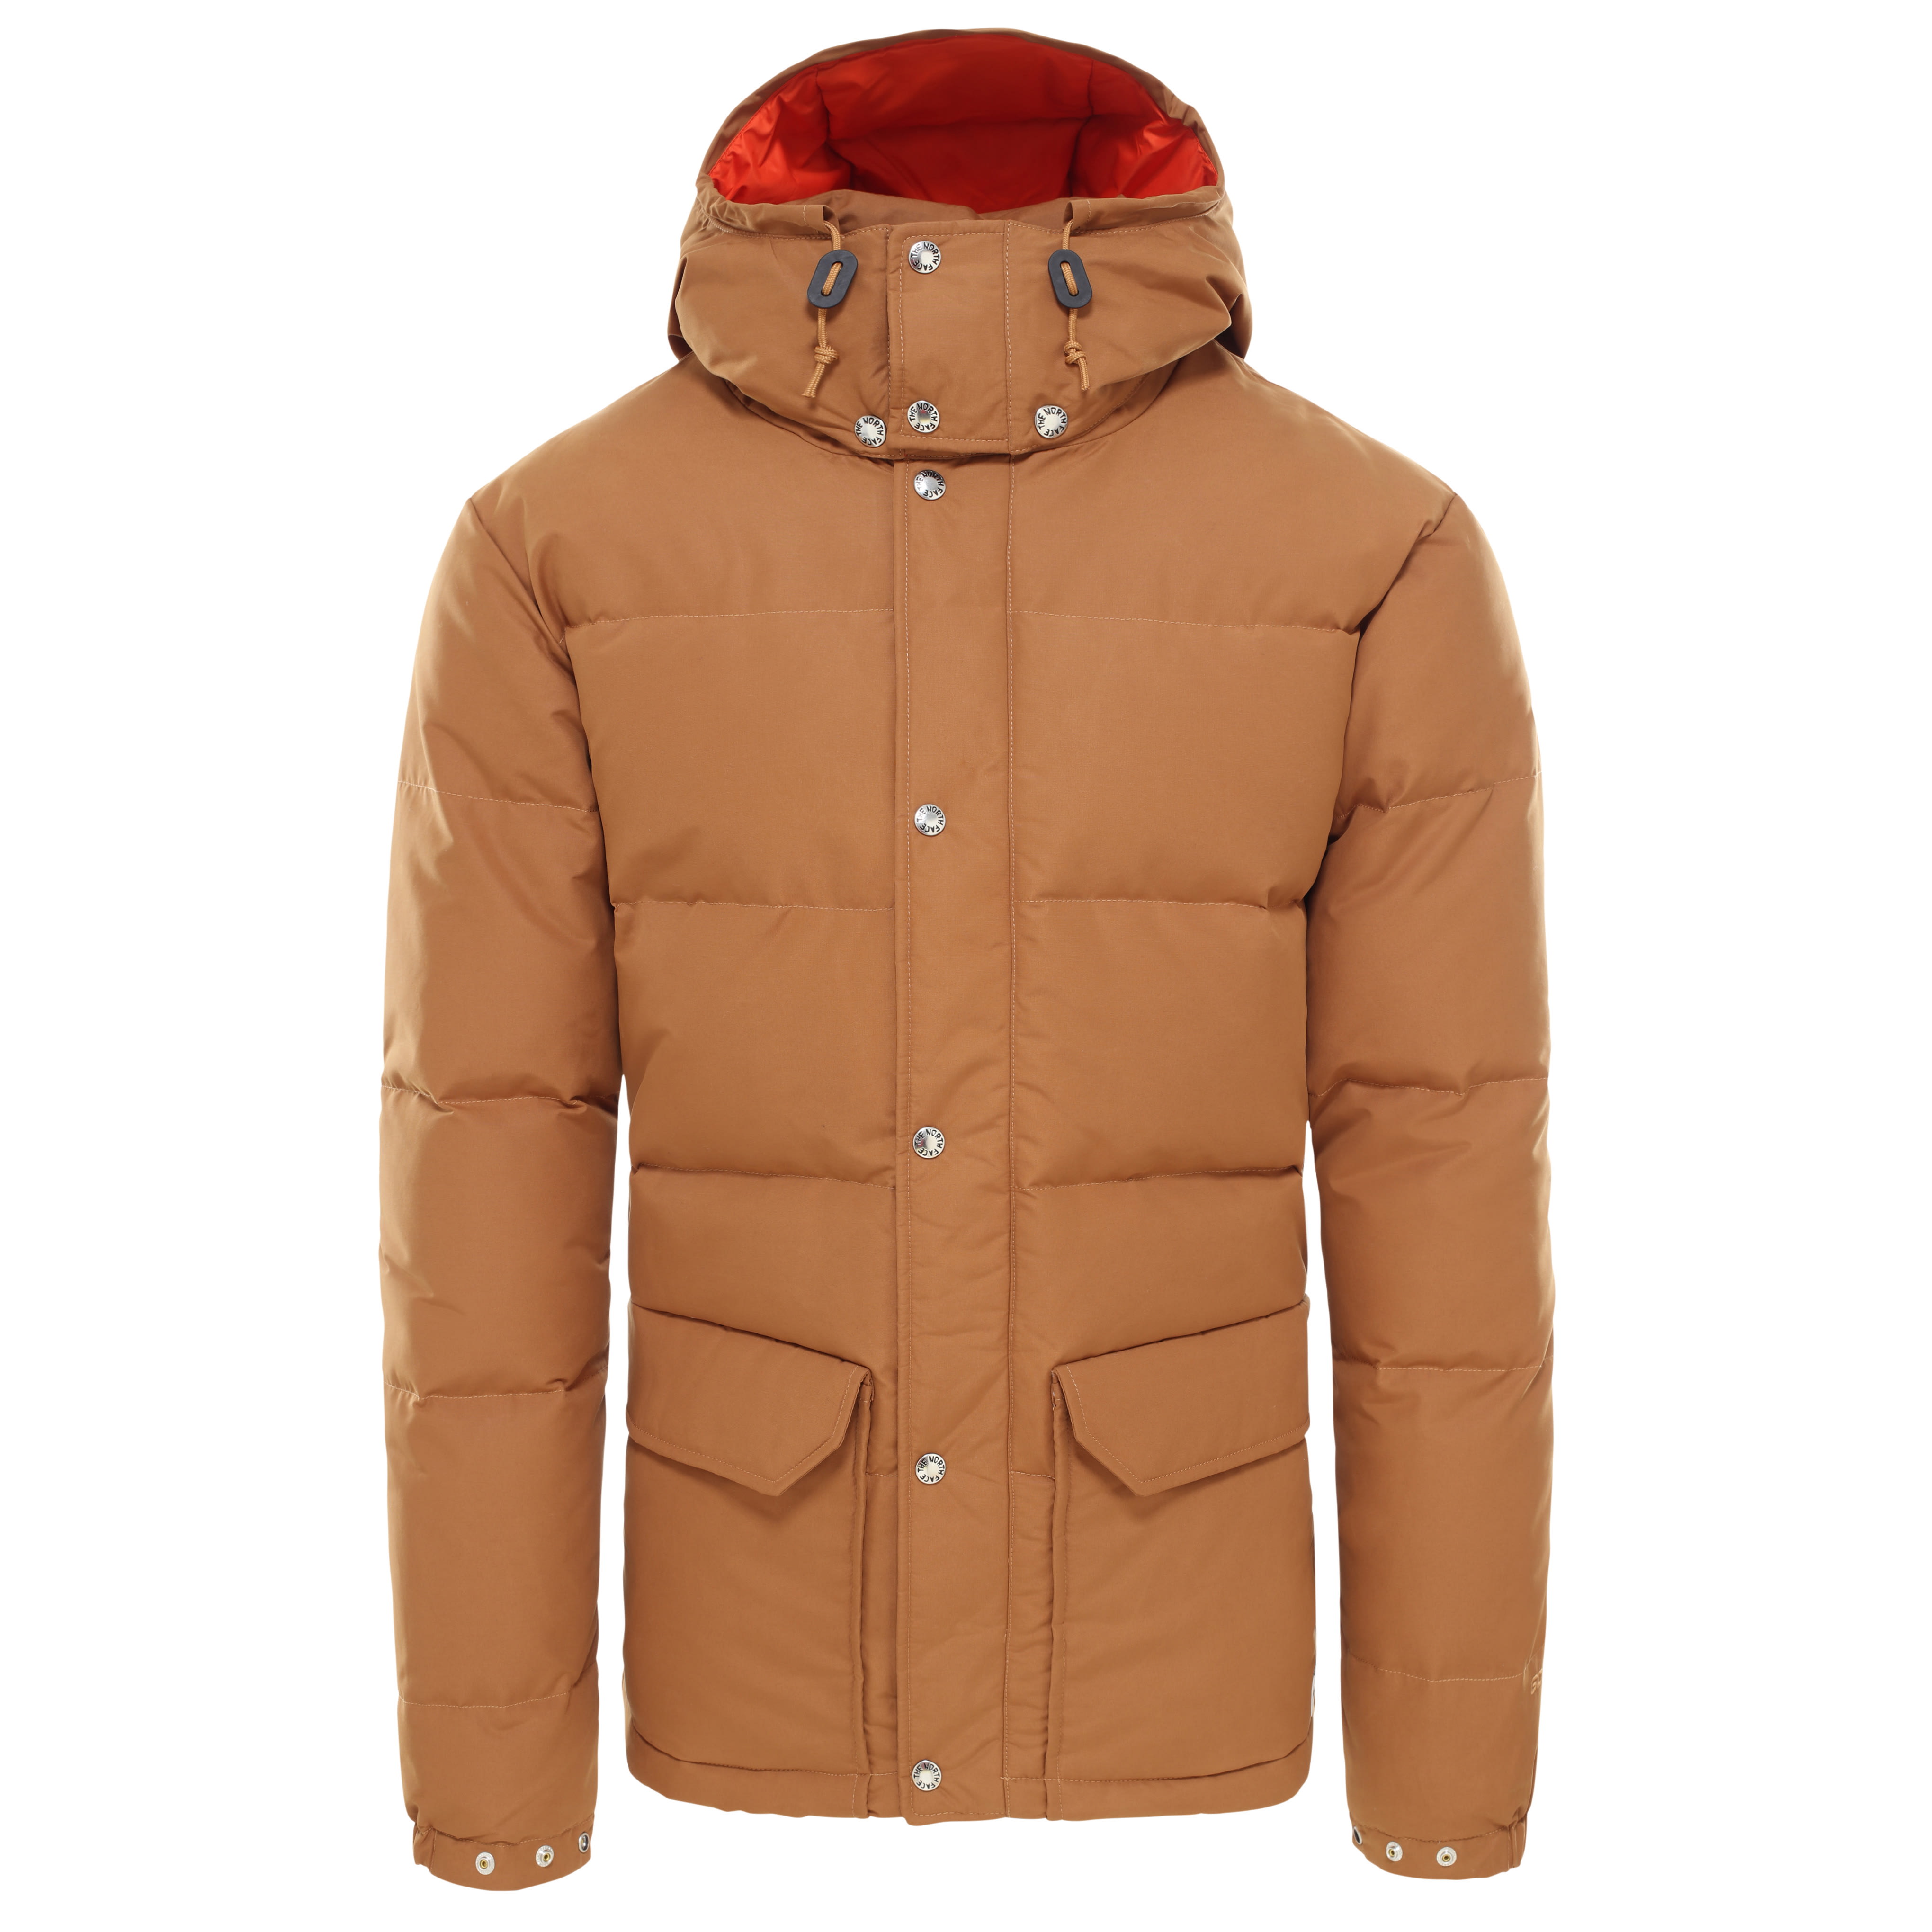 Sierra 3.0 Down Jacket from Outnorth